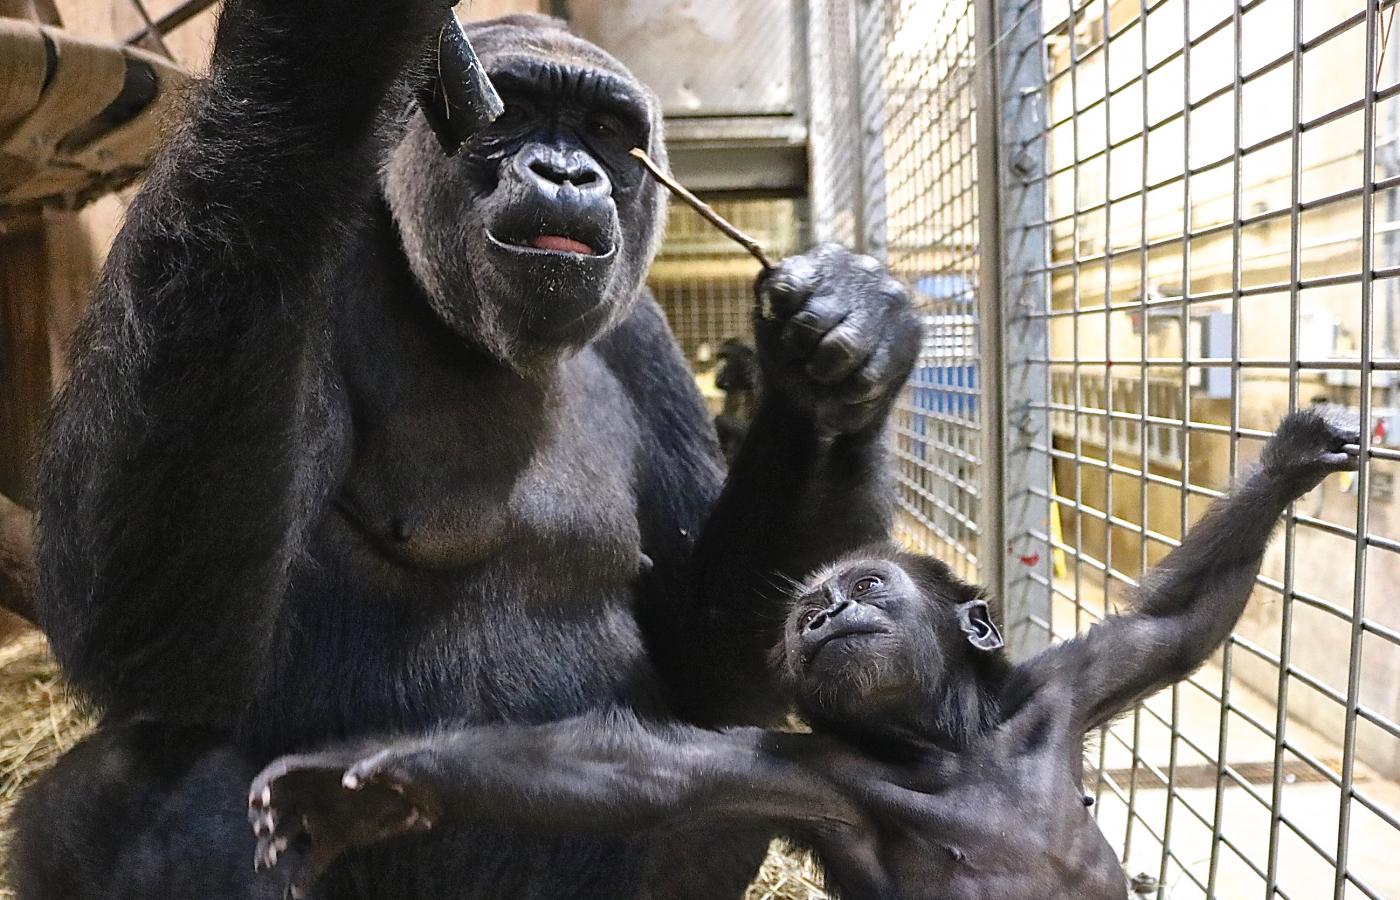 Gorilla Moke reaches for enrichment hose filled with peanut butter